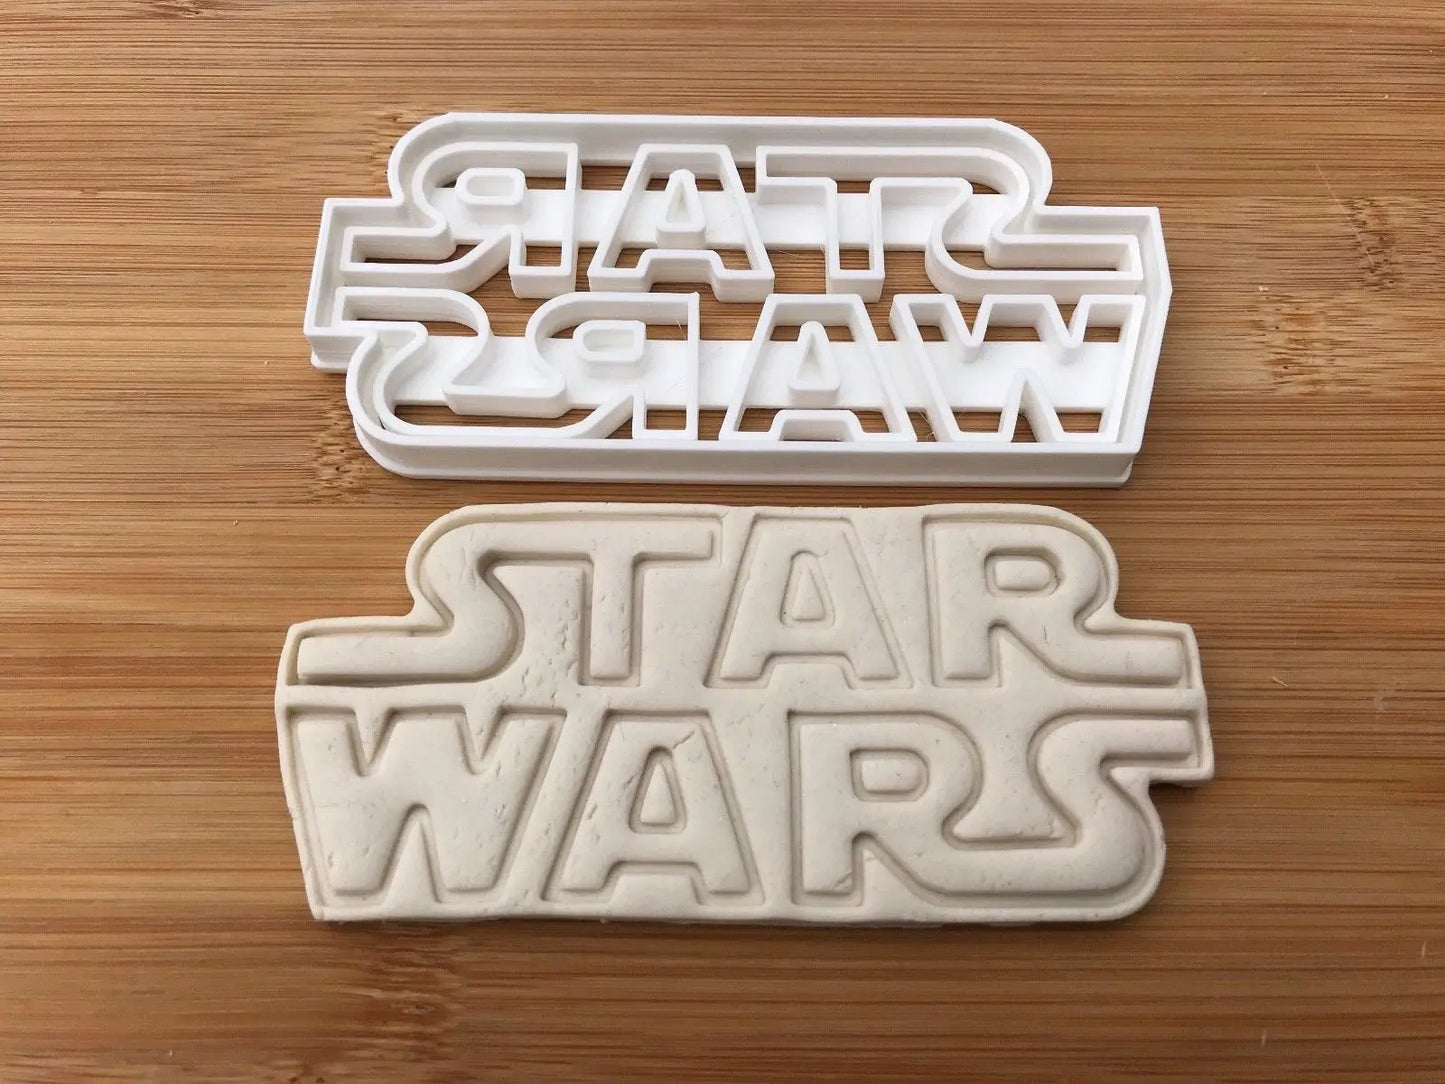 Star wars-INSPIRED Logo LARGE Uk Seller Plastic Biscuit Cookie Cutter Fondant Cake Decor MEG cookie cutters